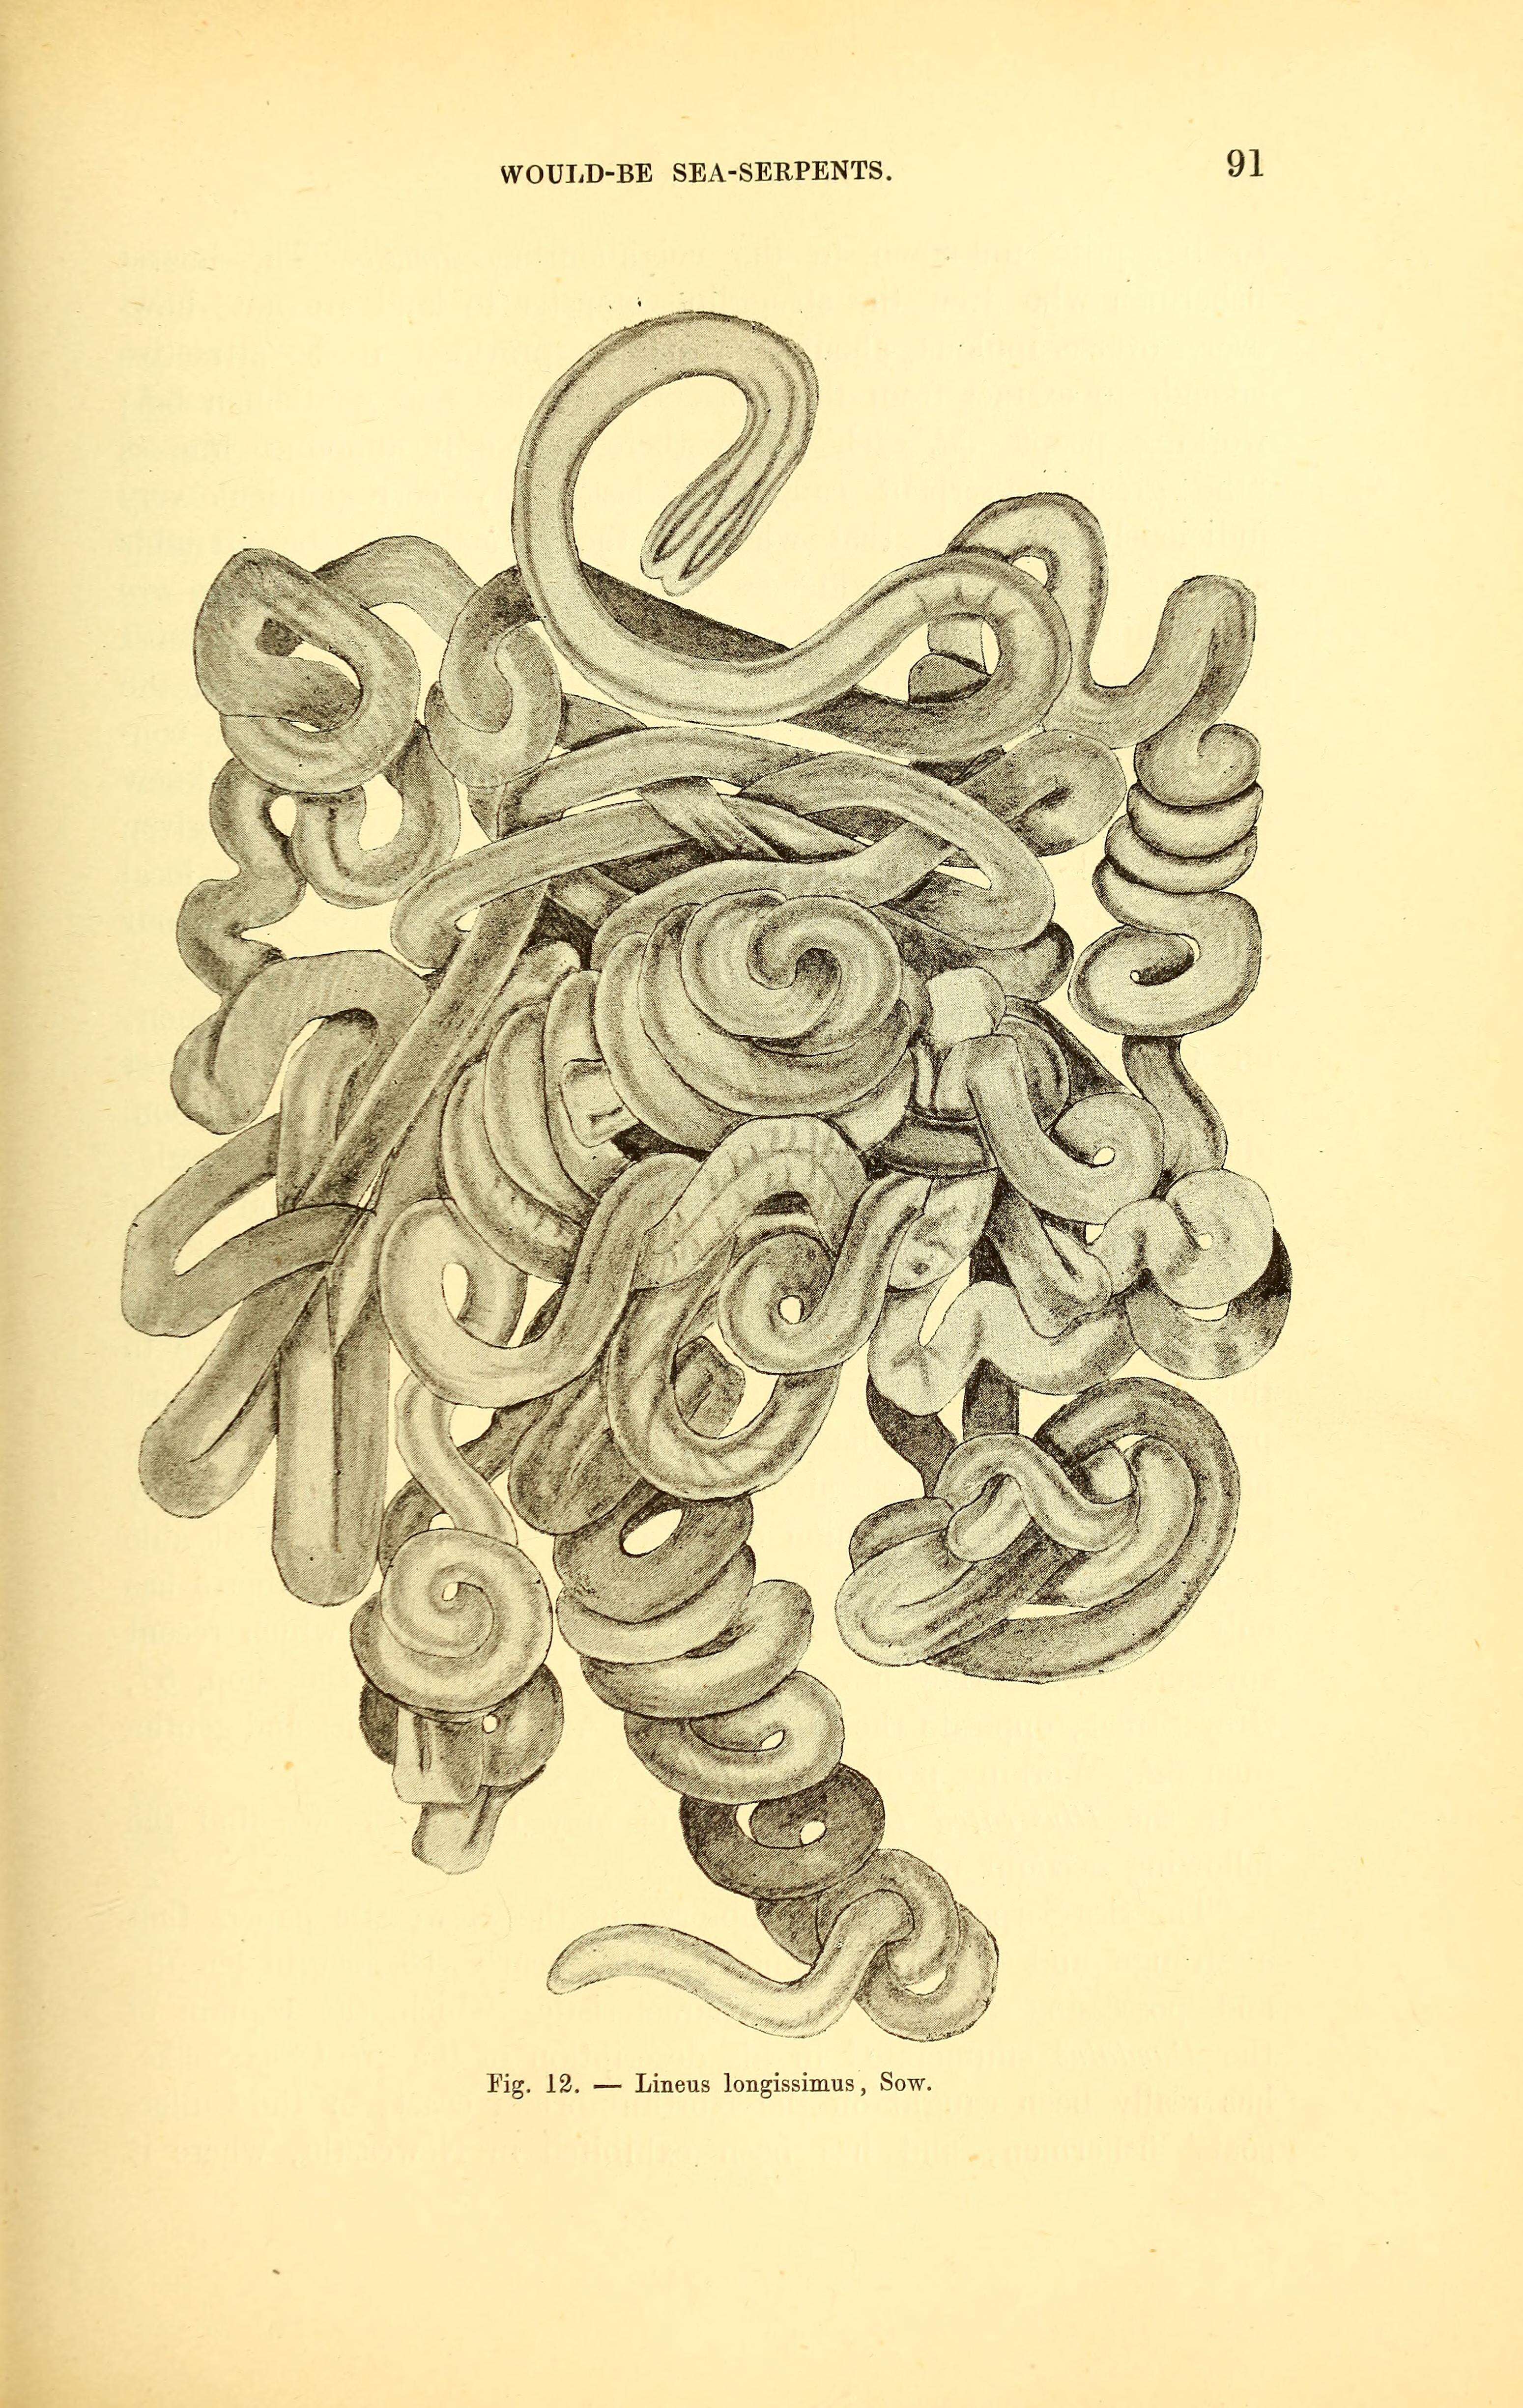 Image of bootlace worm